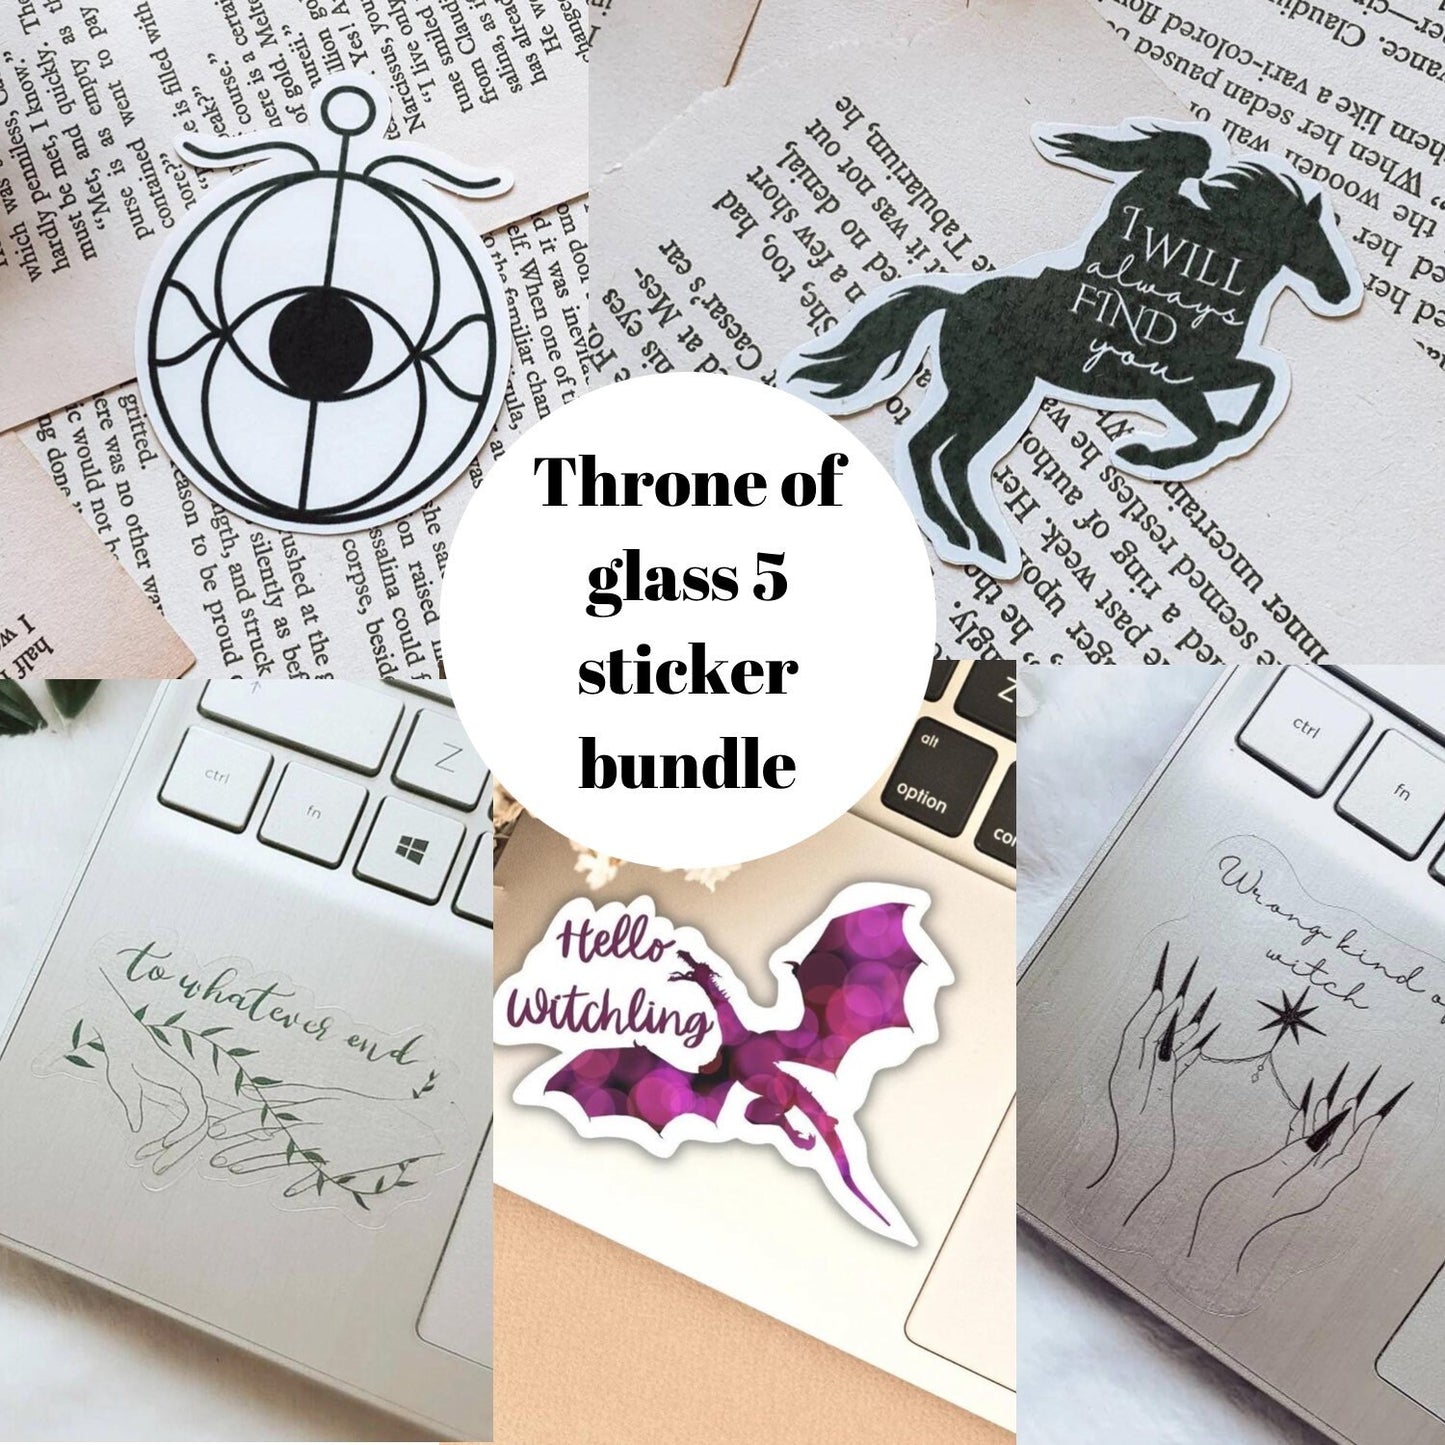 Throne of glass 5 sticker bundle - officially licensed by Sarah J Maas